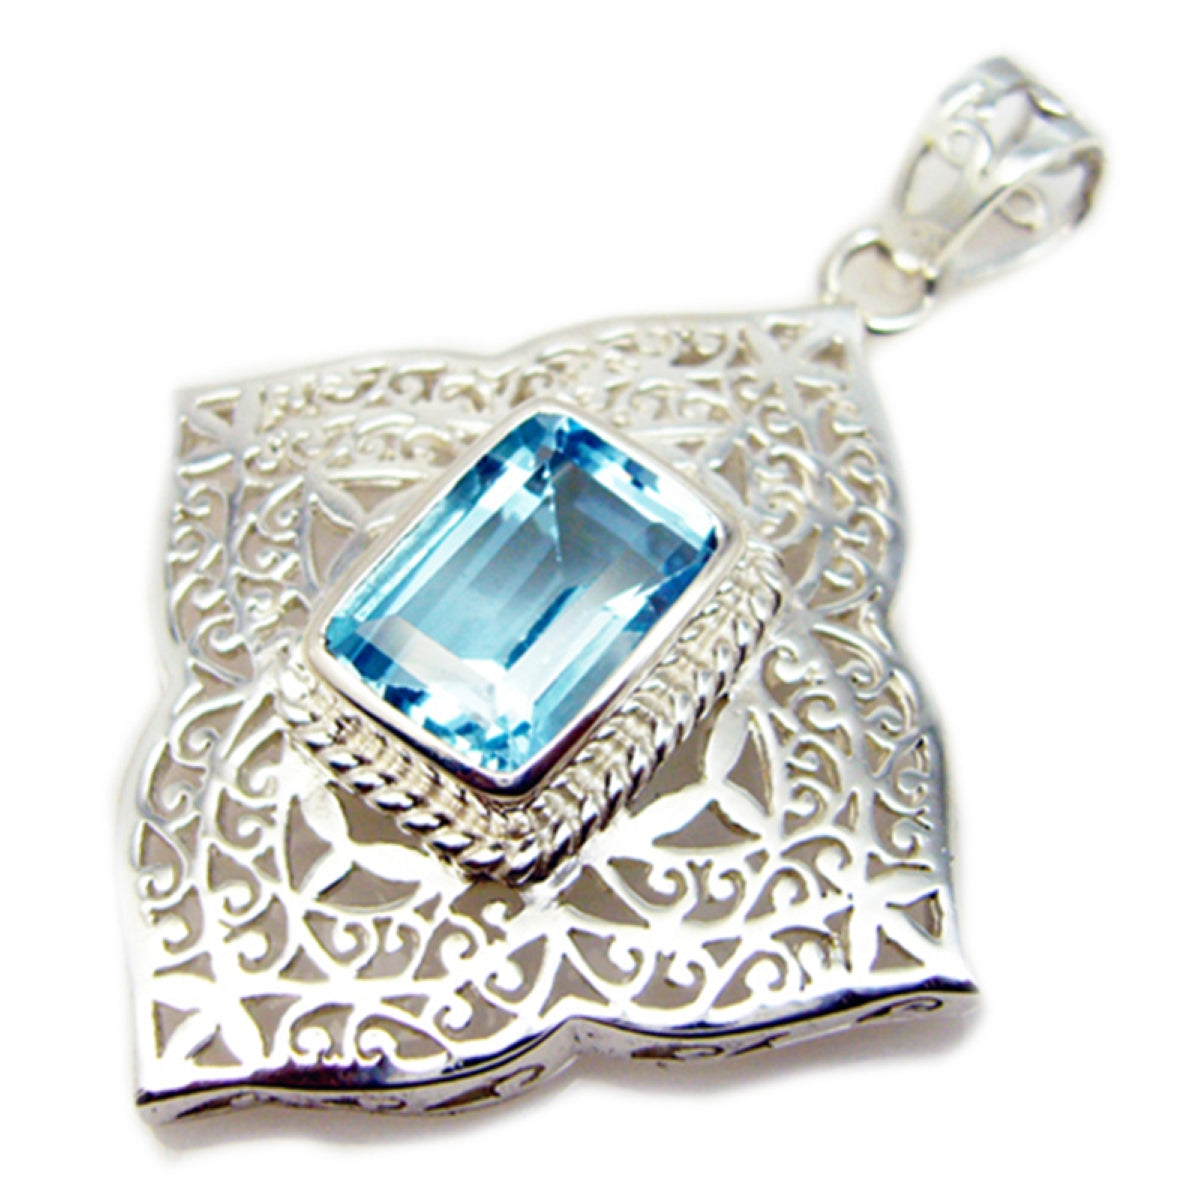 Riyo Good Gemstones Octogon Faceted Blue Blue Topaz 925 Silver Pendant gift for anniversary day